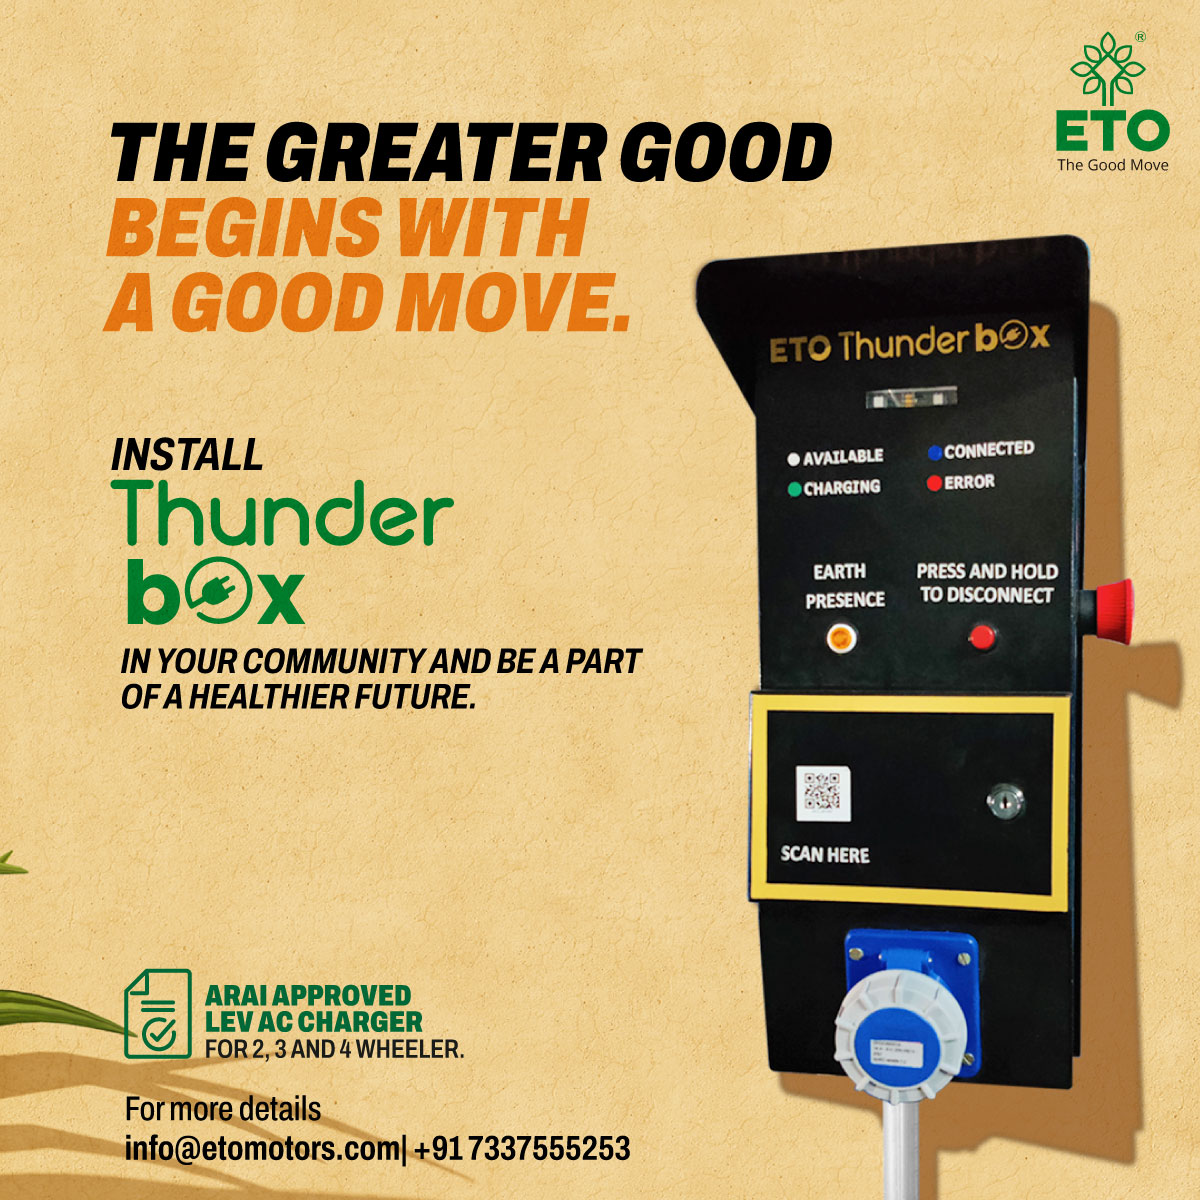 Introduce your community to #thegoodmove. The Thunder box is a quick easy-to-install #ACcharger with app-enabled #charging. #EVchargers lead the way to making the shift towards a healthier and sustainable #planet.
#etomotors #electricvehicles #evcharger #evcharging #environment